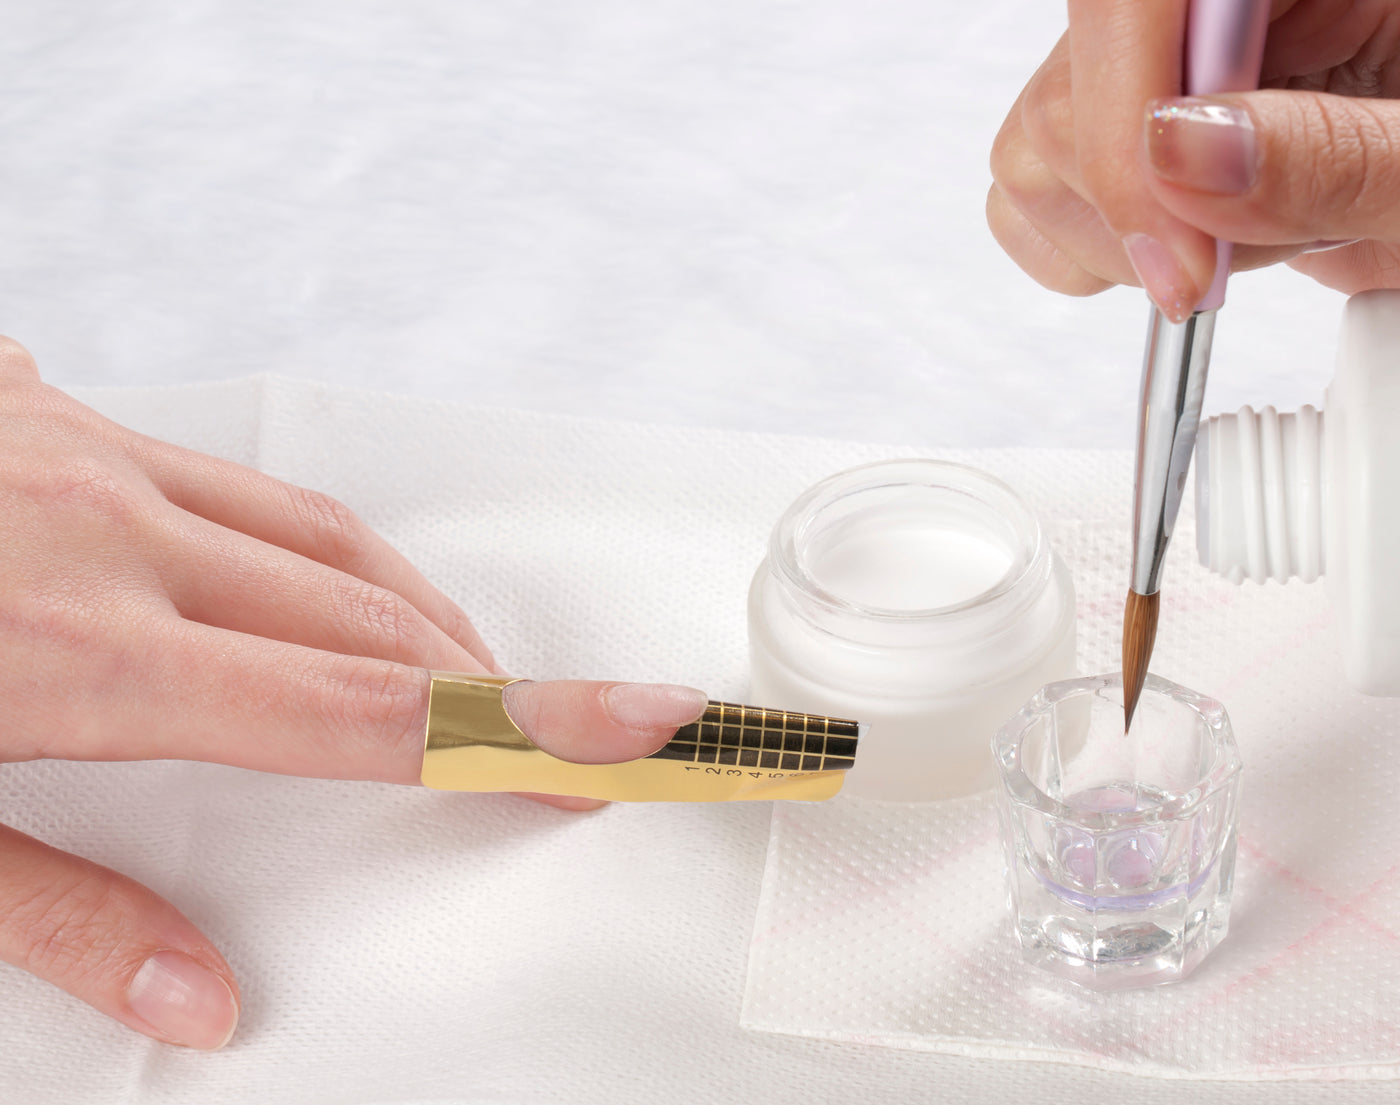 How to Apply Fake Nails 7 Steps to Ensure PressOn Nails Last